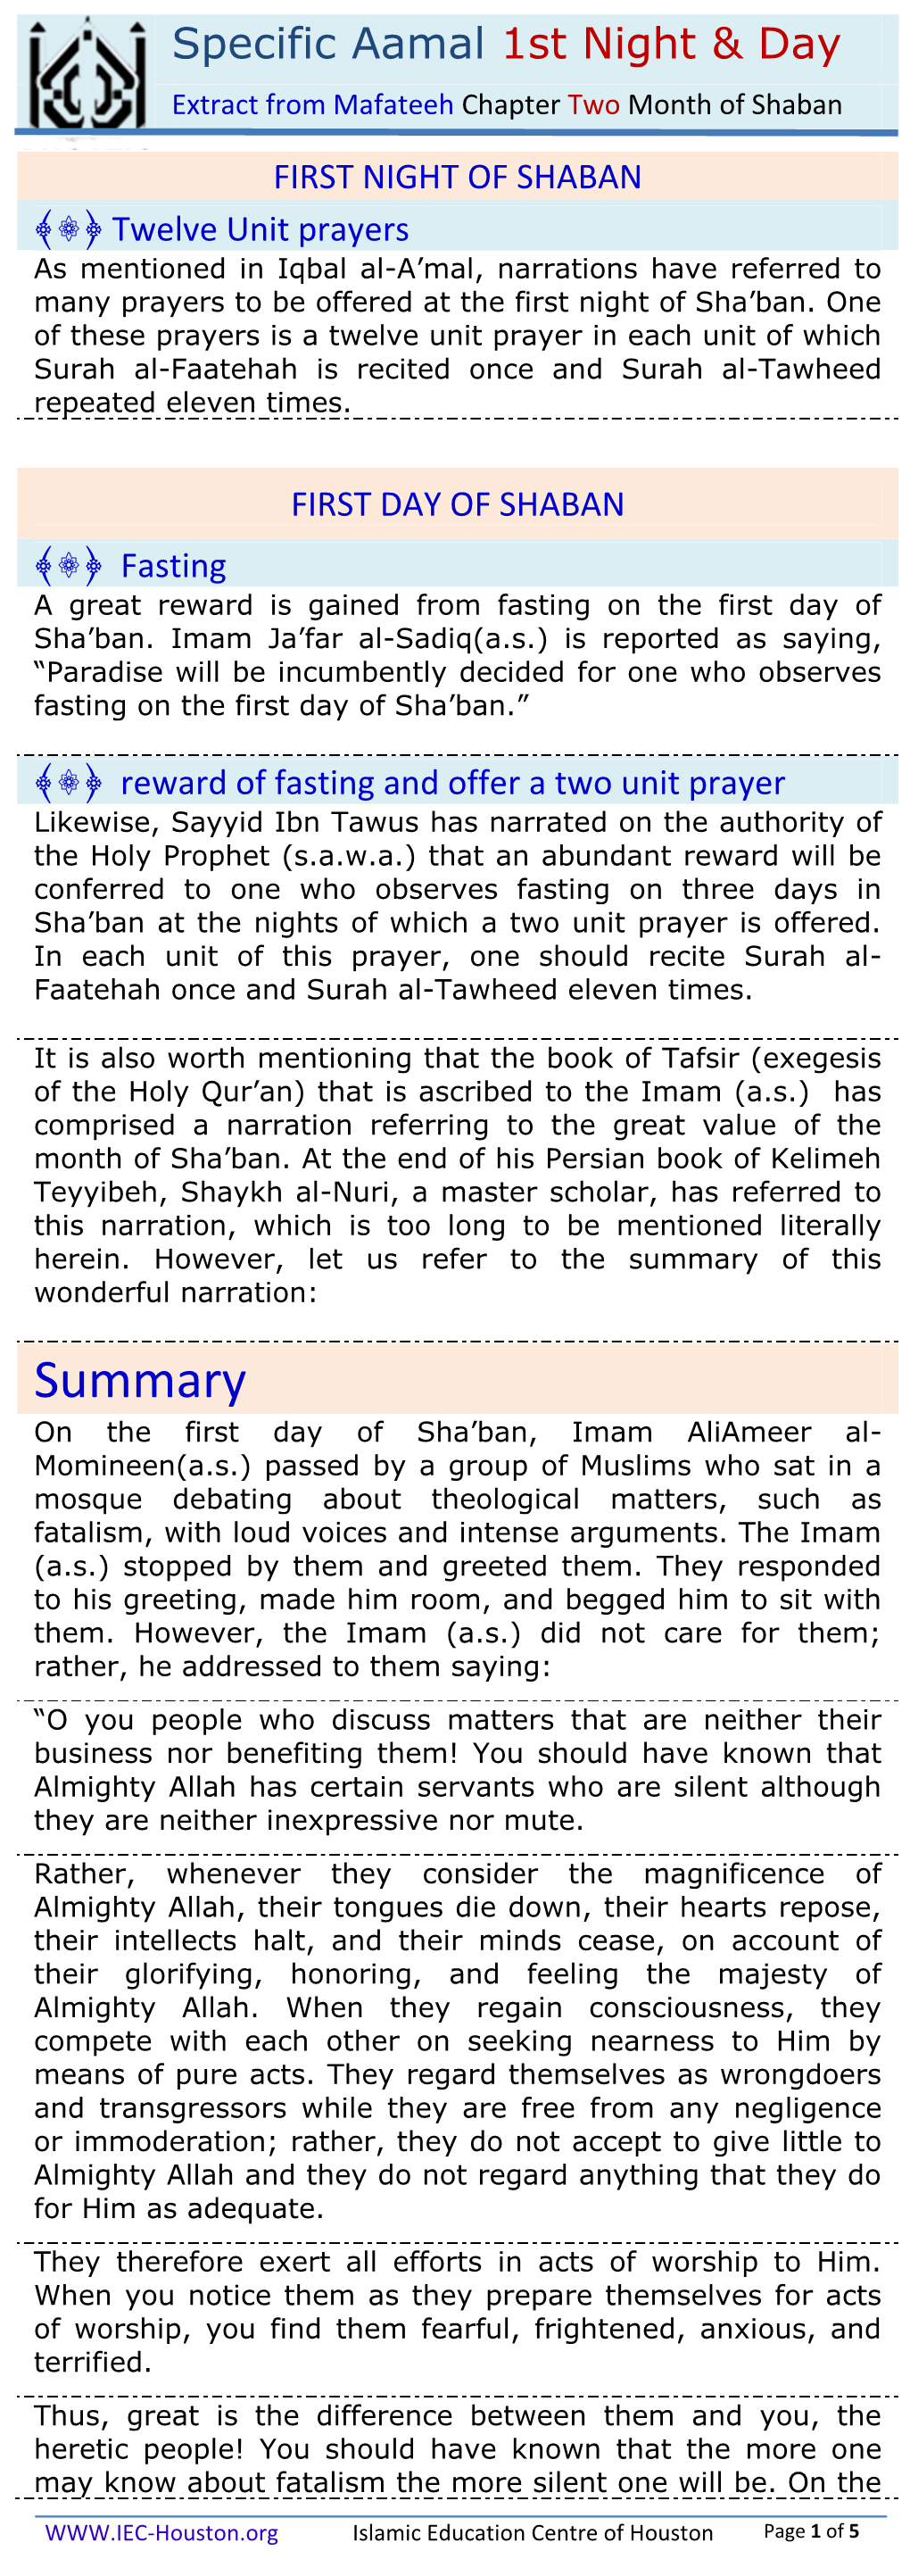 First Night of Shahban and Day A'amal